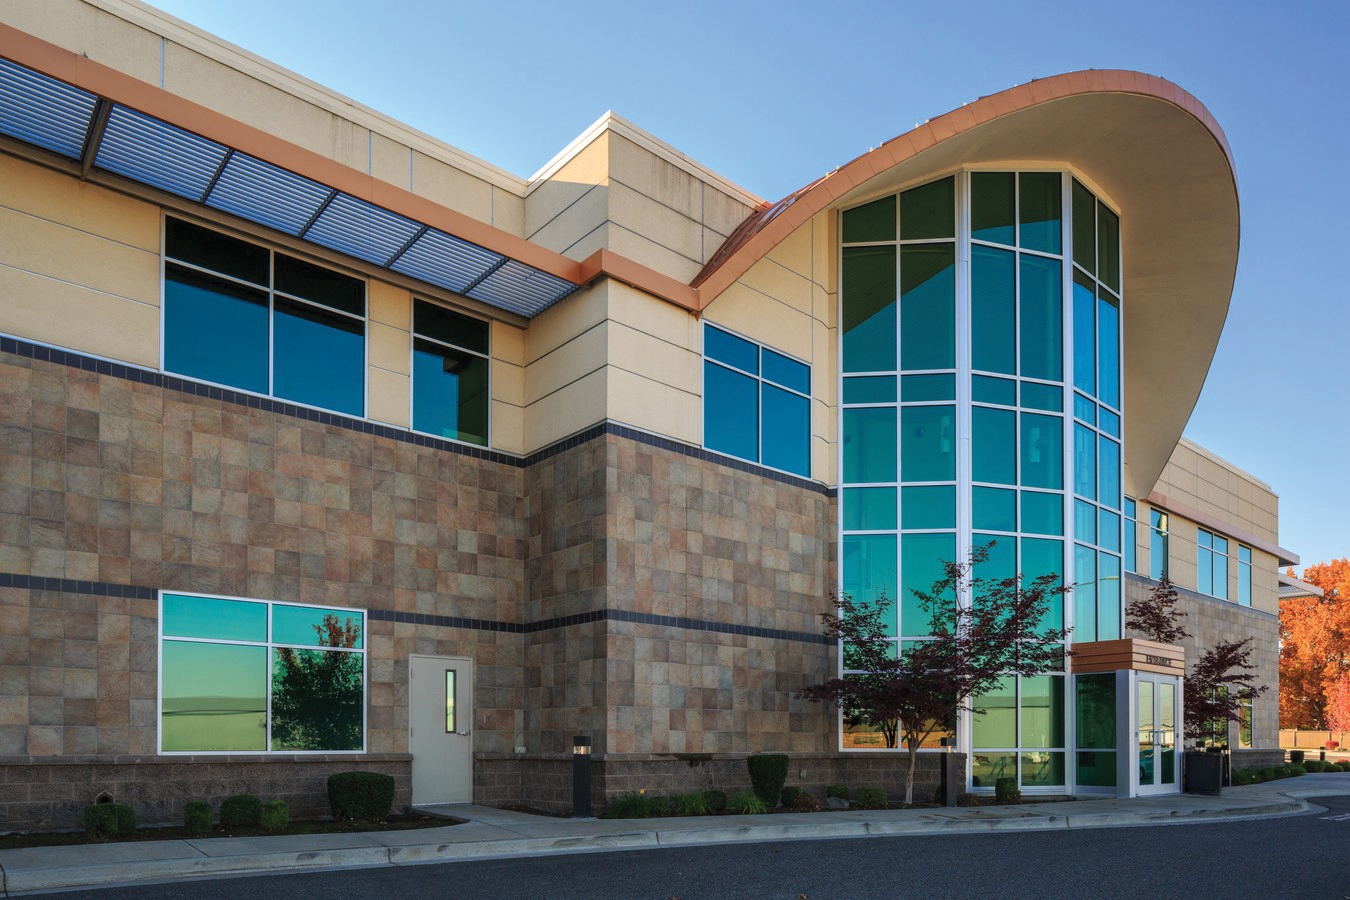 Pasco investors recently spent $3.9 million to buy the 102,000-square-foot Tri-City Herald building on 333 W. Canal Drive in Kennewick. They plan to transform the downtown building into multi-tenant office space. (Courtesy SVN Retter & Co.)